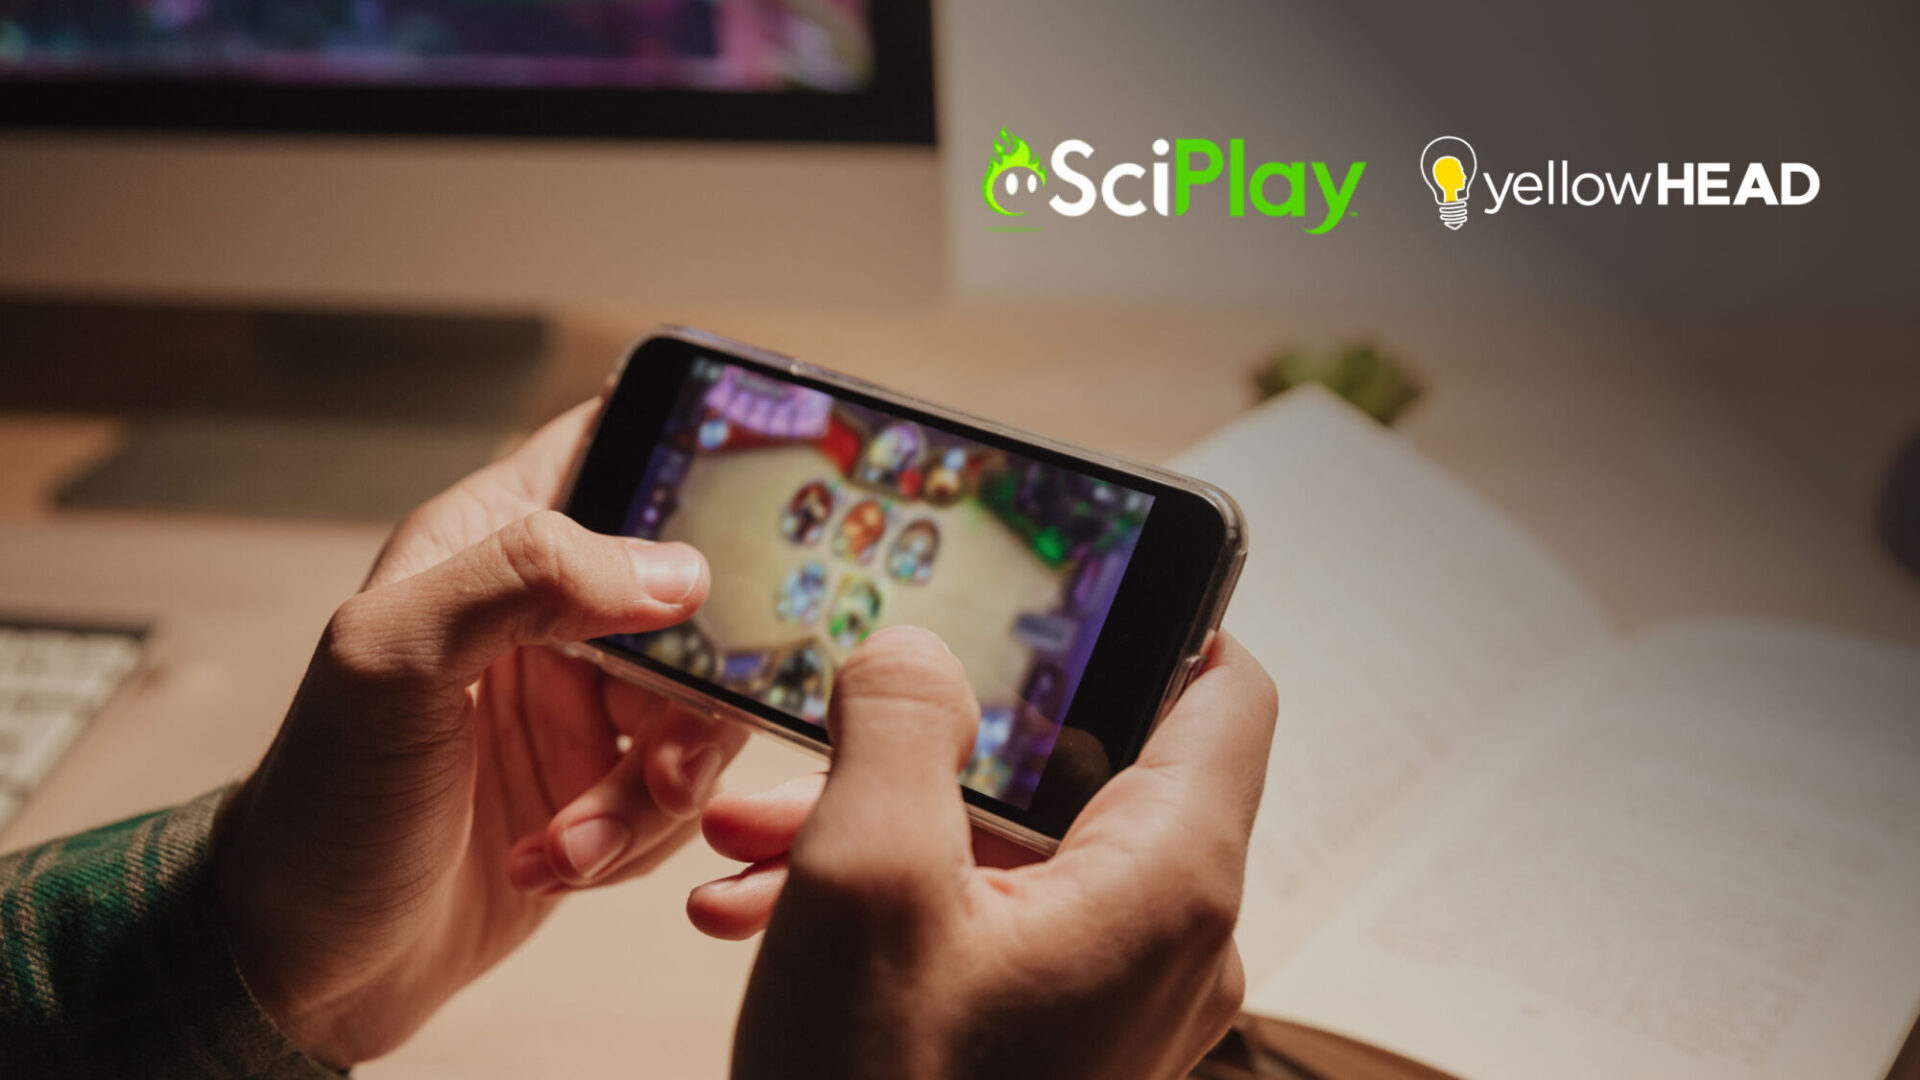 Revolutionizing Mobile Social Gaming Ads: How a Live Action Ad Helped SciPlay Achieve +95% CTR with yellowHEAD